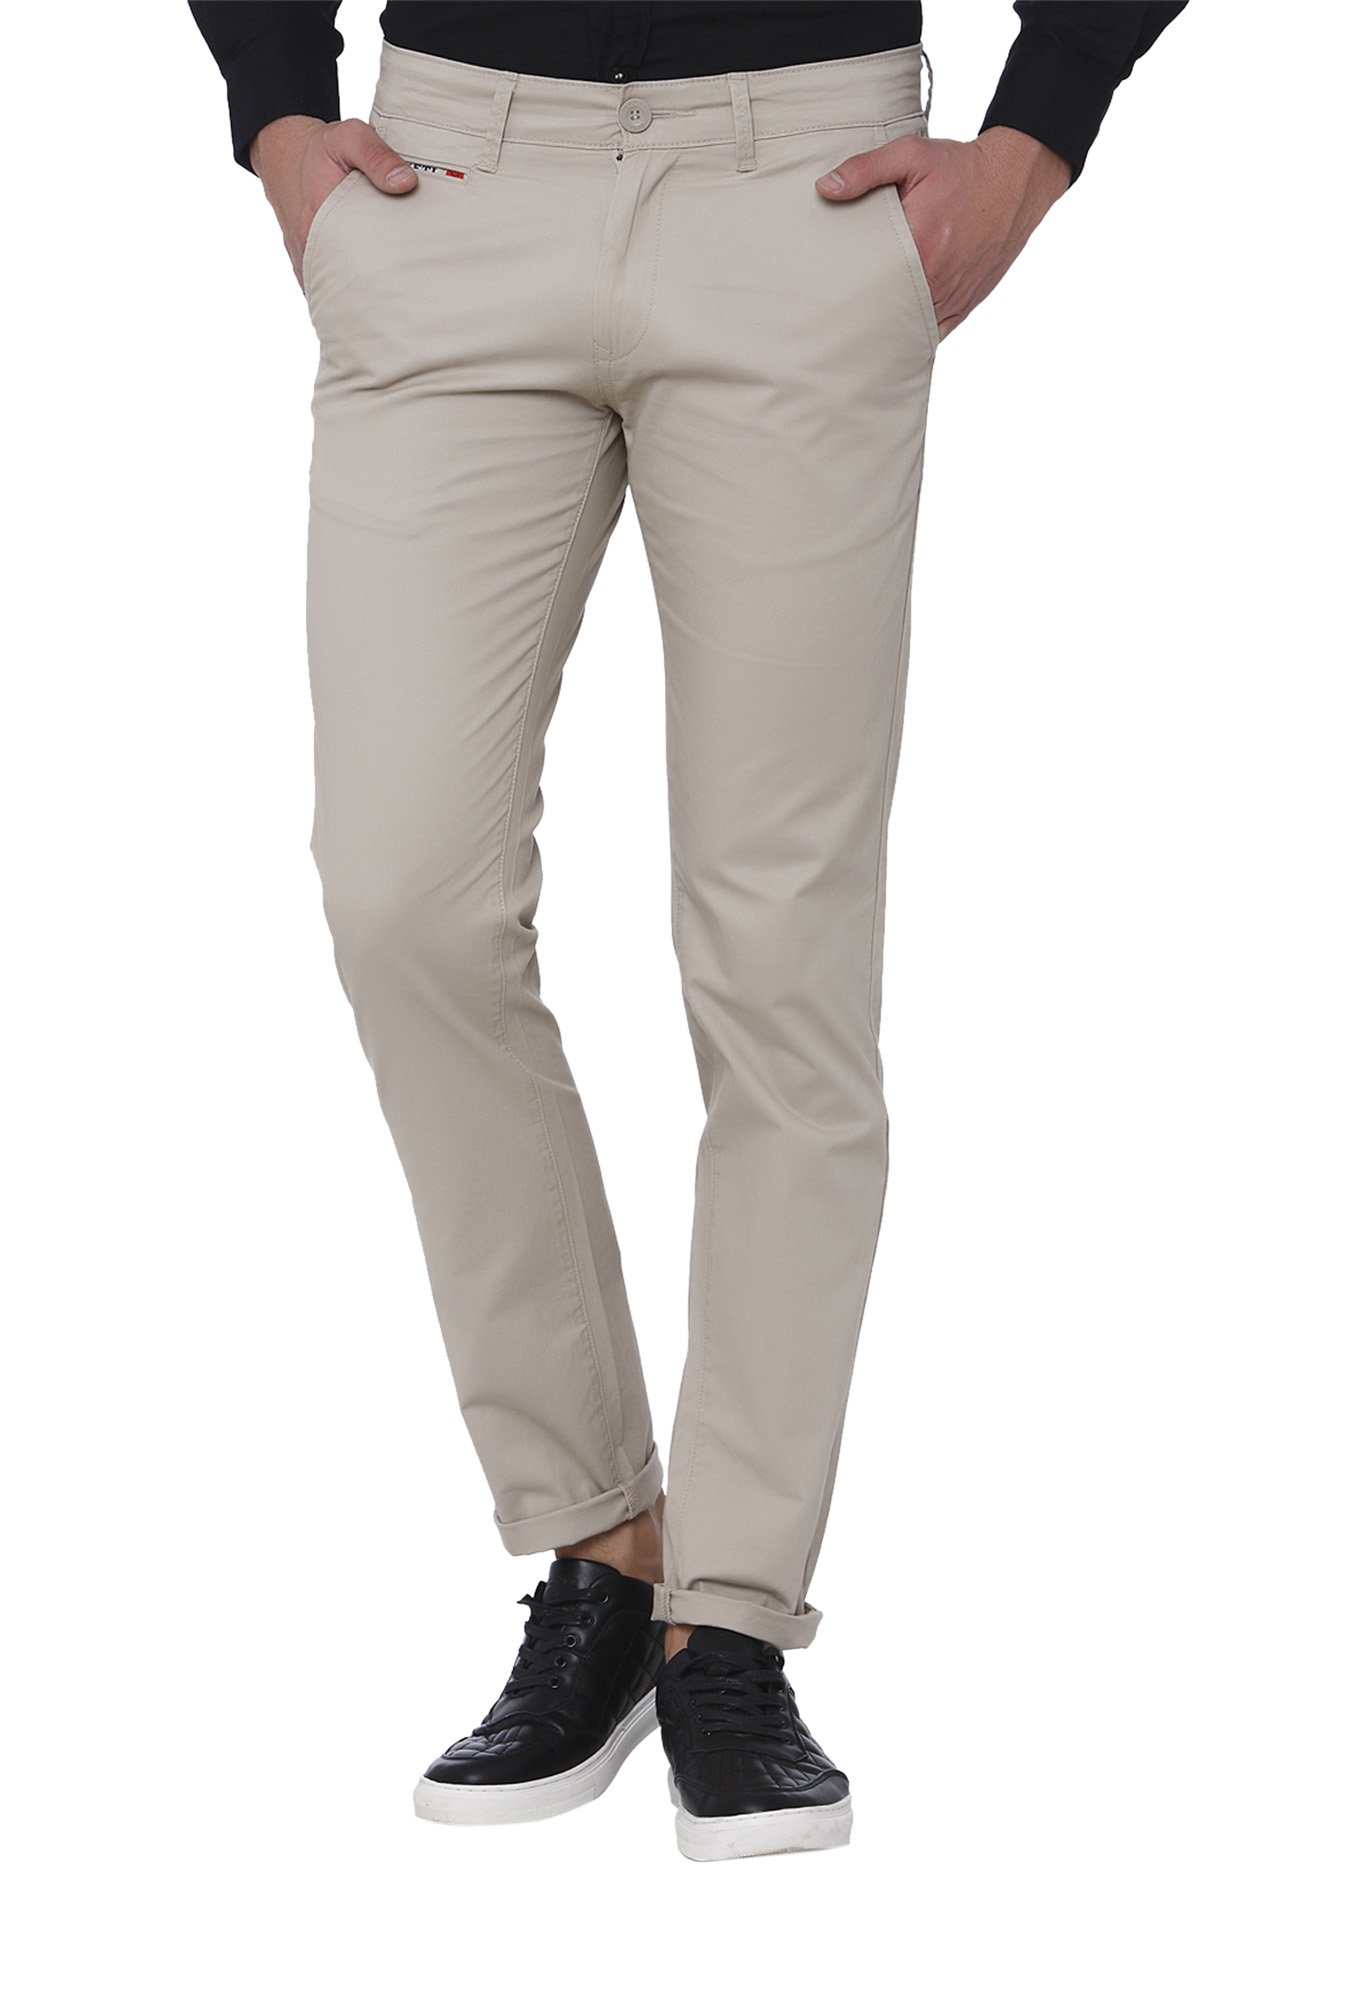 Mufti Casual Trousers  Buy Mufti Fawn Beige Mens Ankle Length Slim Fit  Trousers Online  Nykaa Fashion